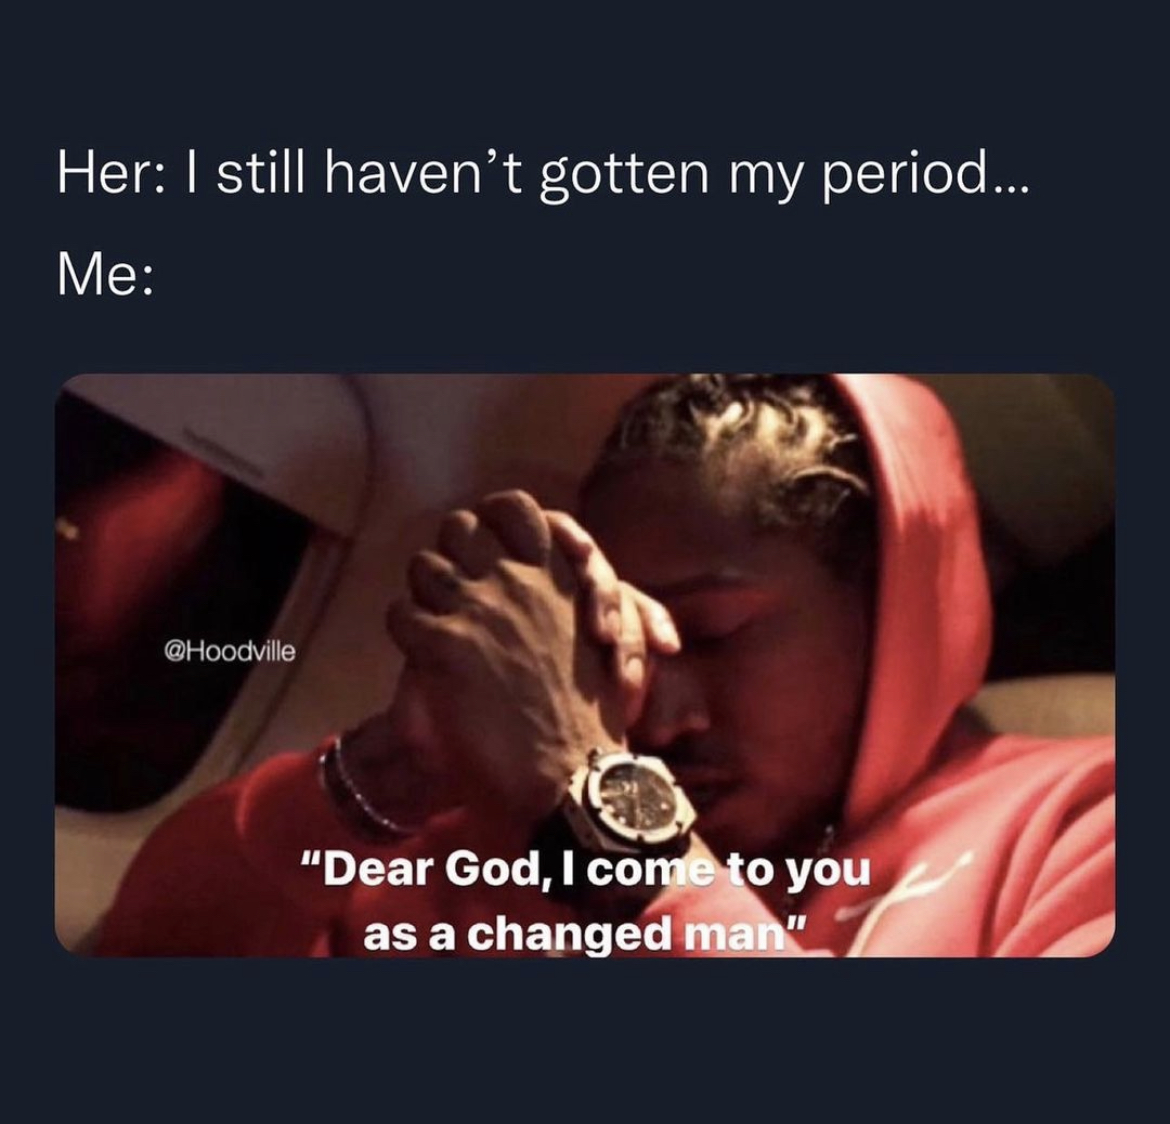 Hoodville memes and captions - photo caption - Her I still haven't gotten my period... Me "Dear God, I come to you as a changed man"